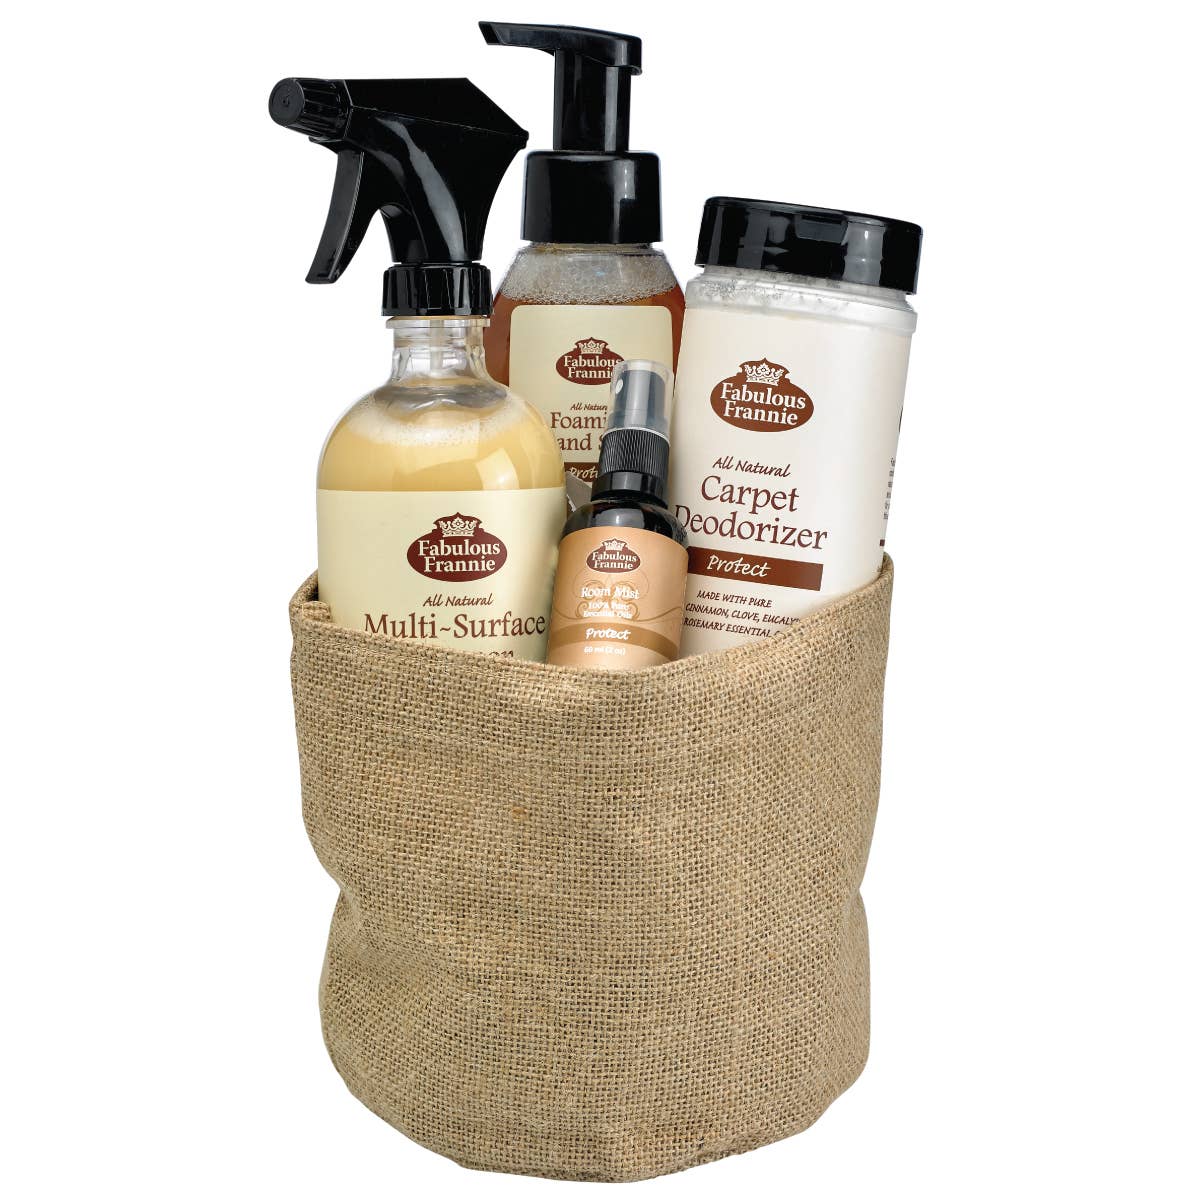 Clean House - Protect Gift Basket